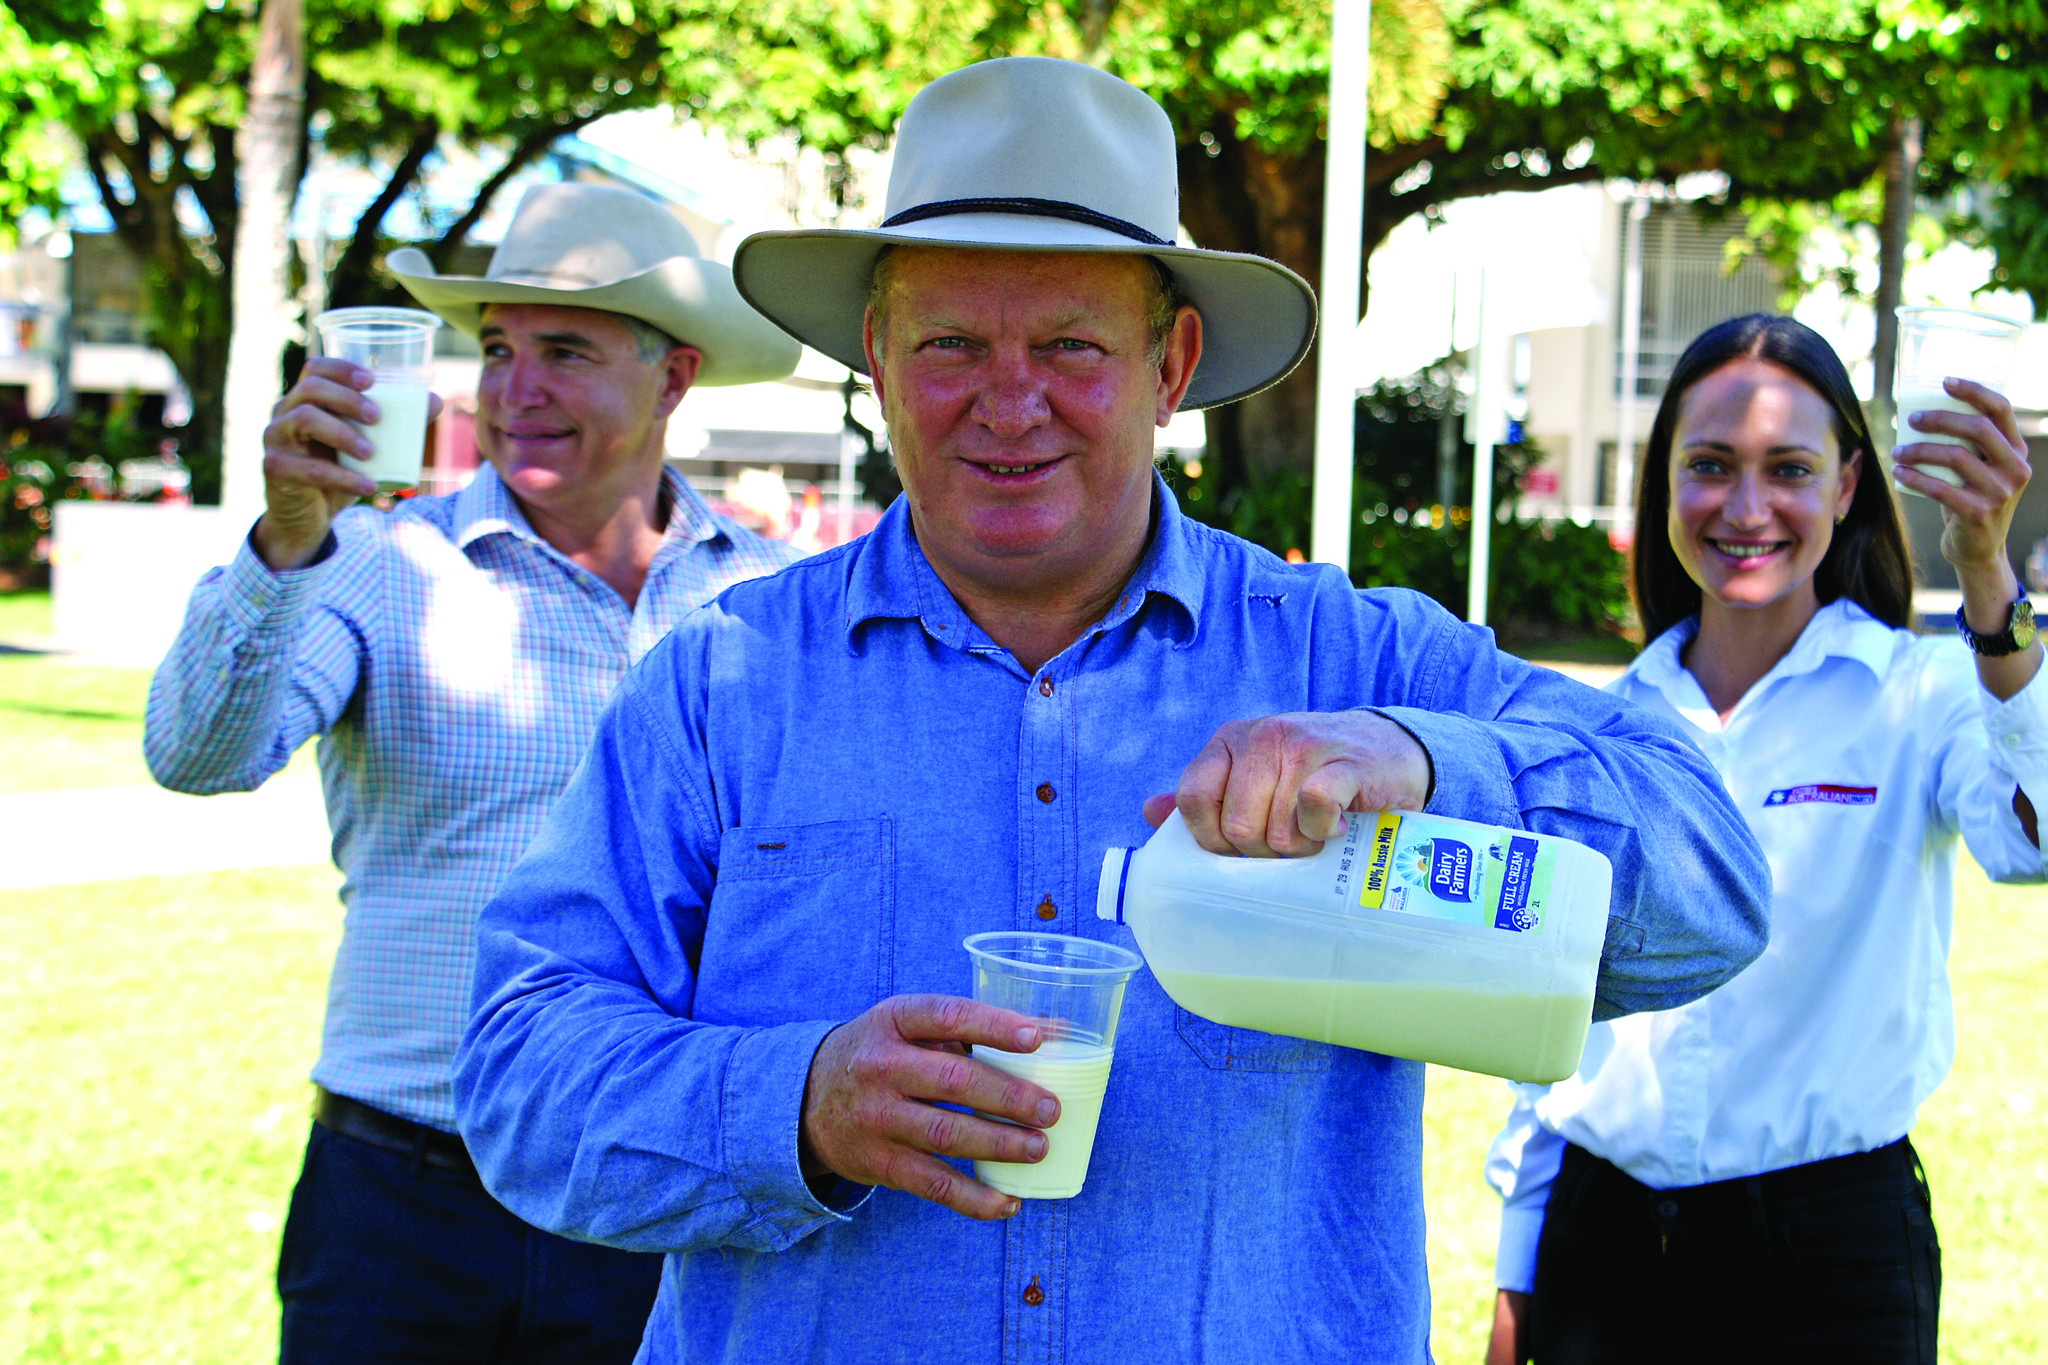 Member for Hill Shane Knuth, KAP Queensland Leader, Robbie Katter and KAP Candidate for Cook, Tanika Parker all toasting the Dairy Farmers with a glass of milk